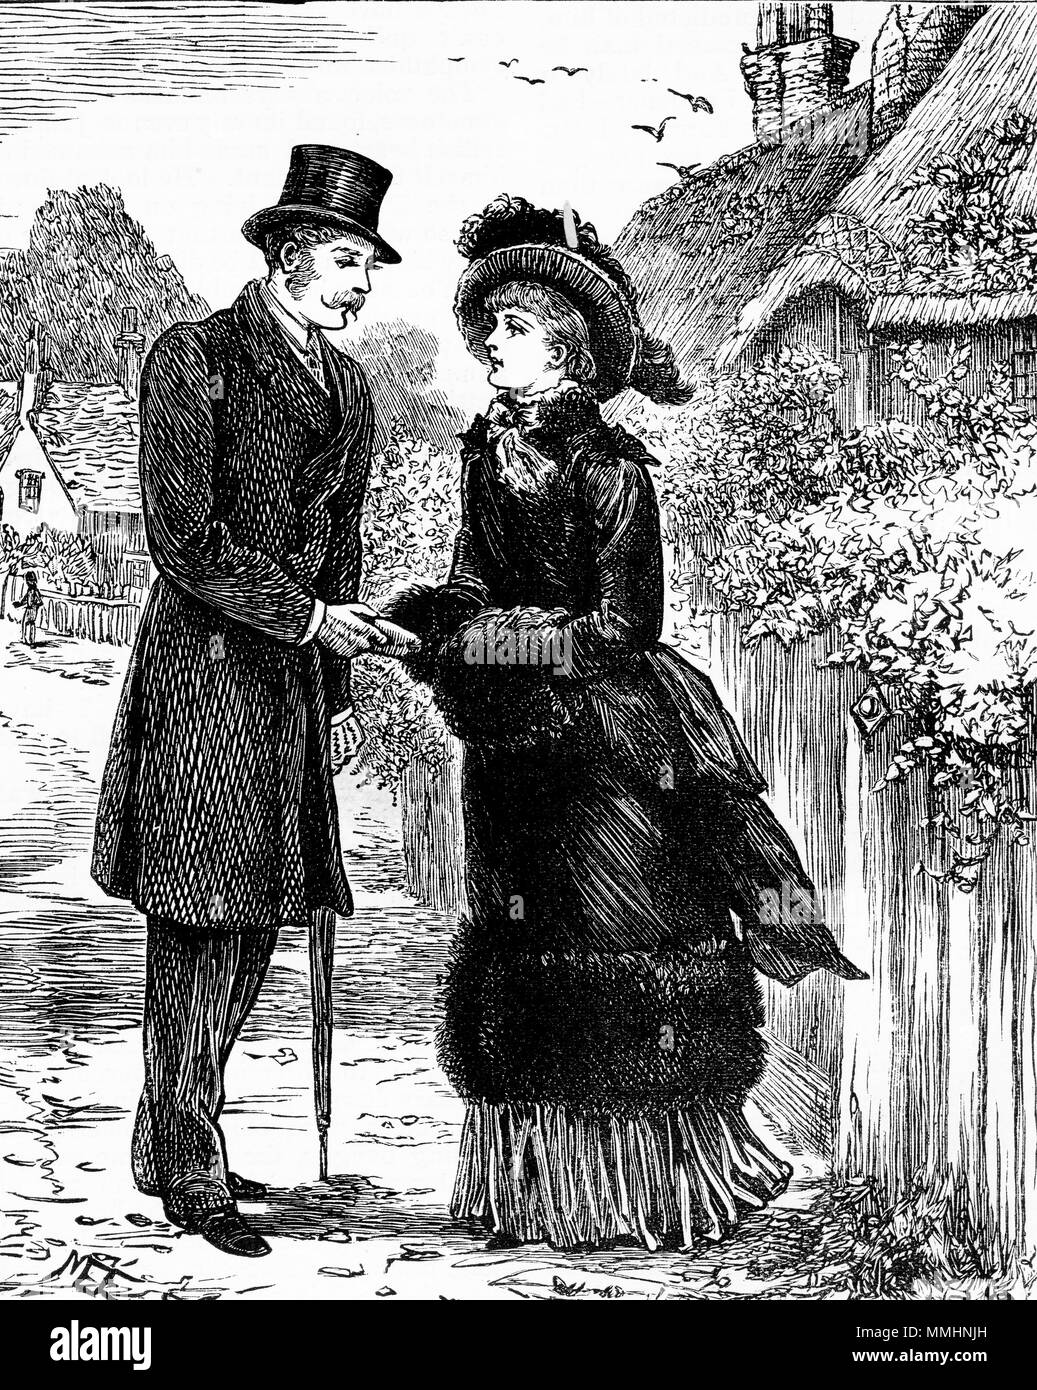 Engraving of a Victorian couple meeting on the street. From an original engraving in the Girl's Own Paper magazine 1883. Stock Photo